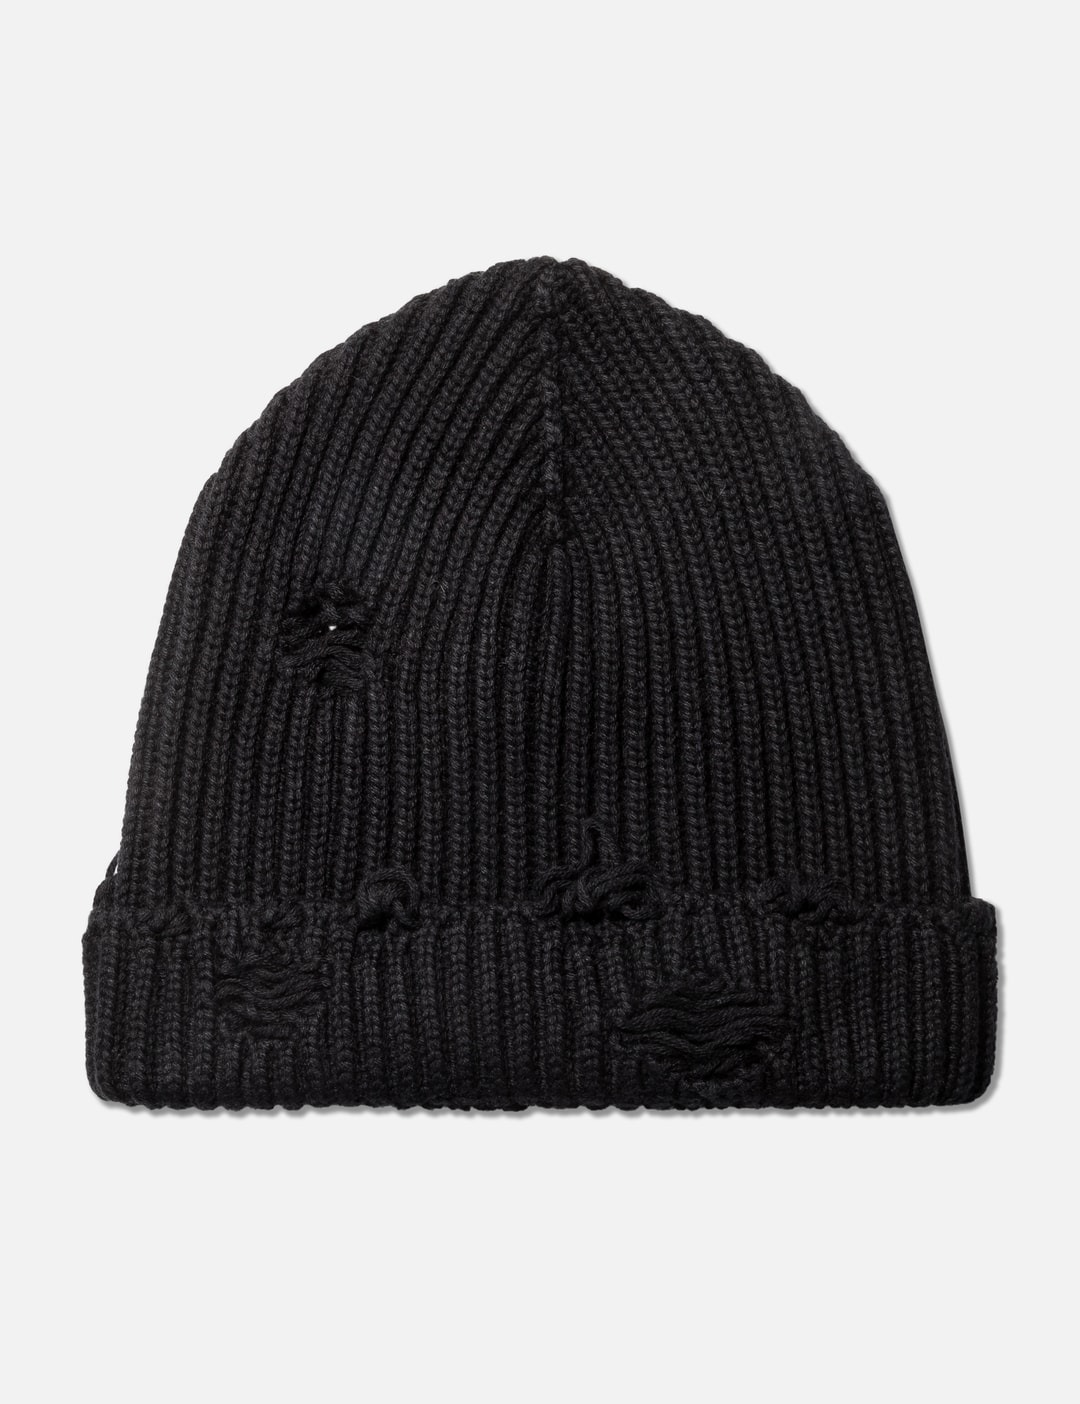 MM6 Maison Margiela - Distressed Beanie | HBX - Globally Curated ...